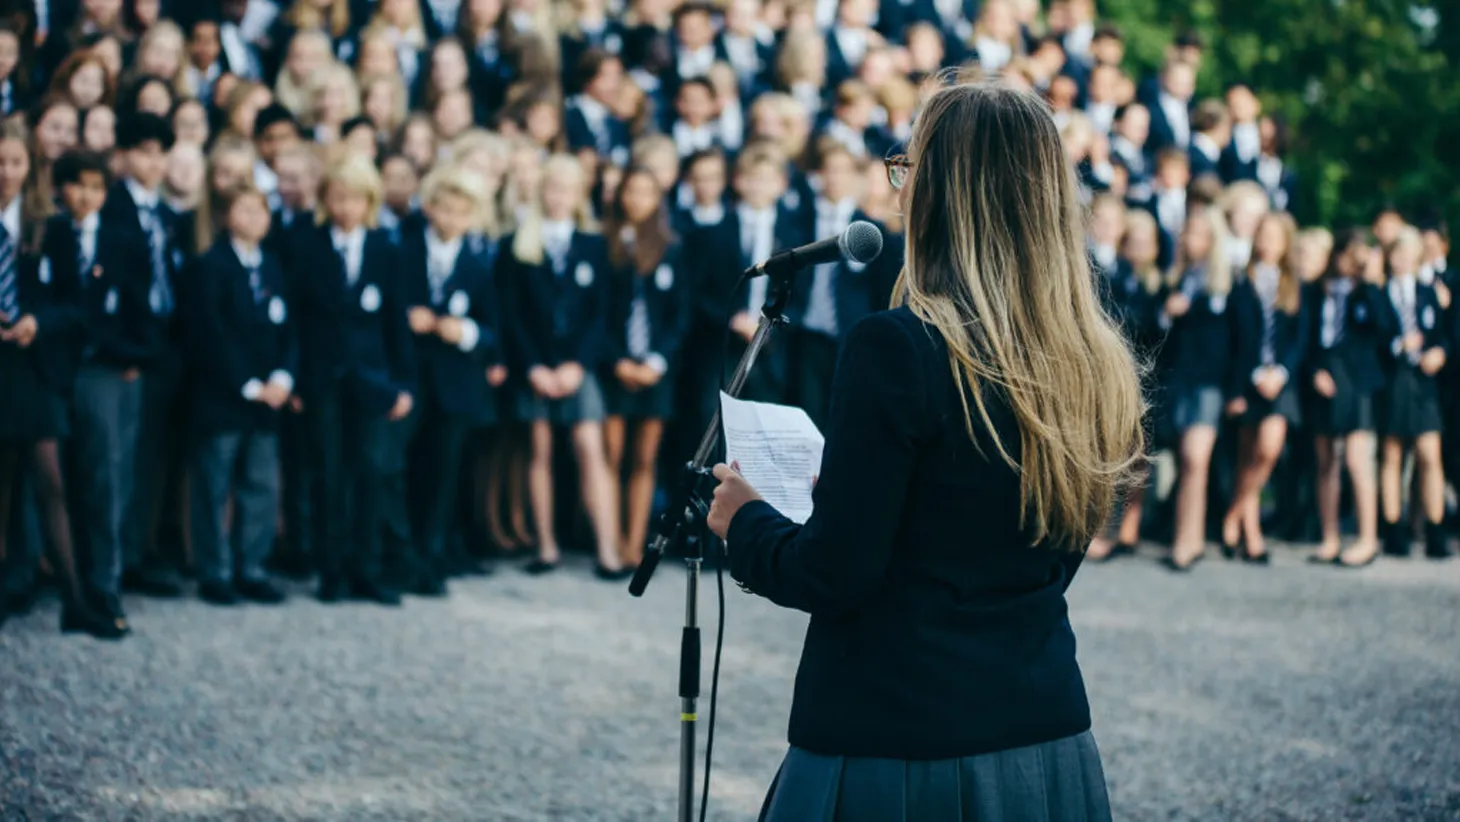 10 Ways to Improve Your Public Speaking Skills – Tips for Teens